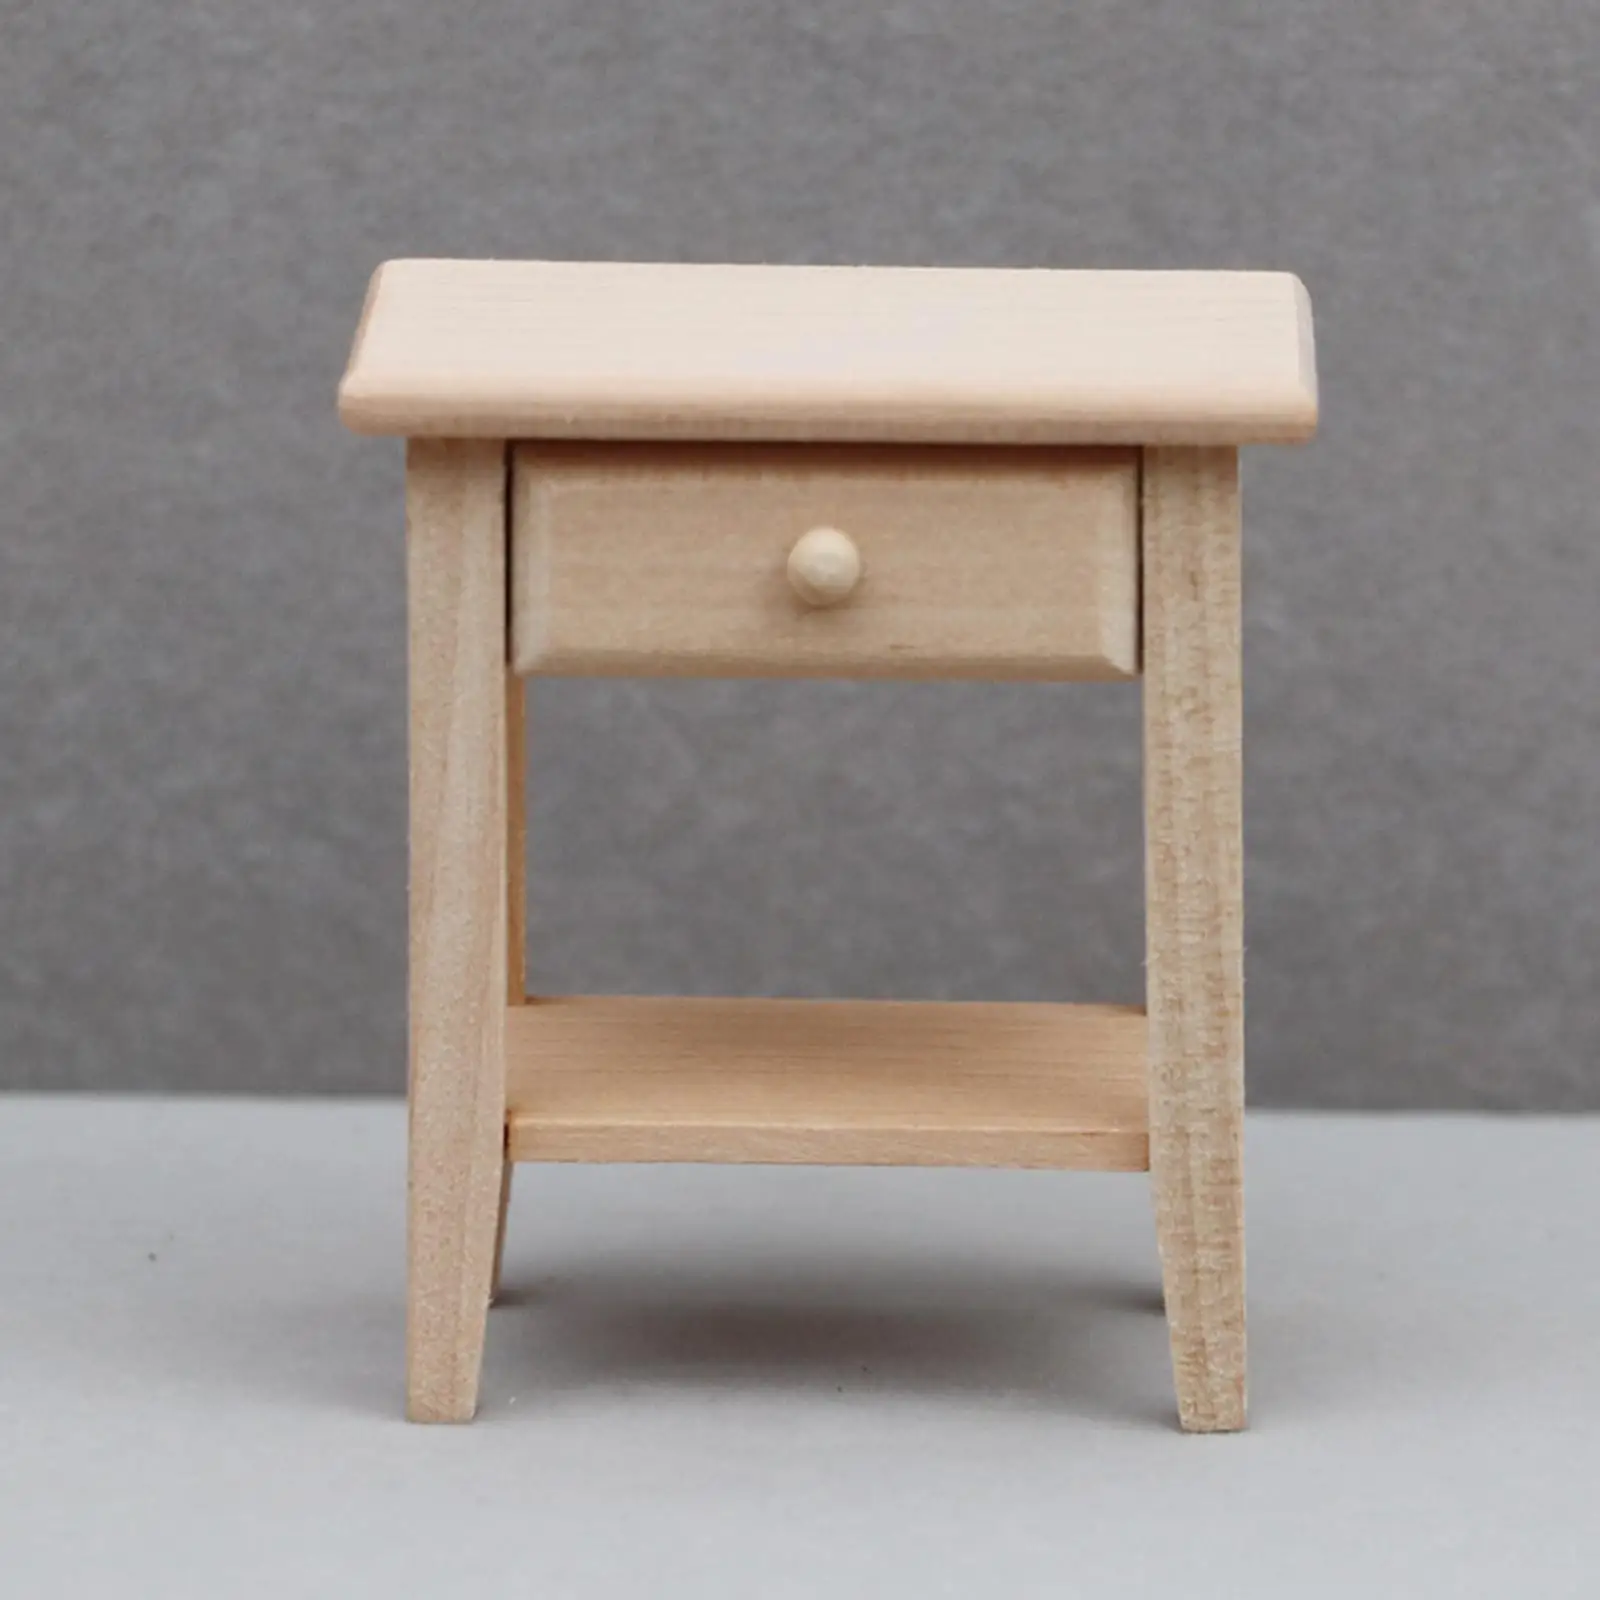 1/12 Dollhouse Night Stands Unpainted Dollhouse Furnishings Handcraft Dollhouse Bedside Tables for Diorama Accessory Ornament